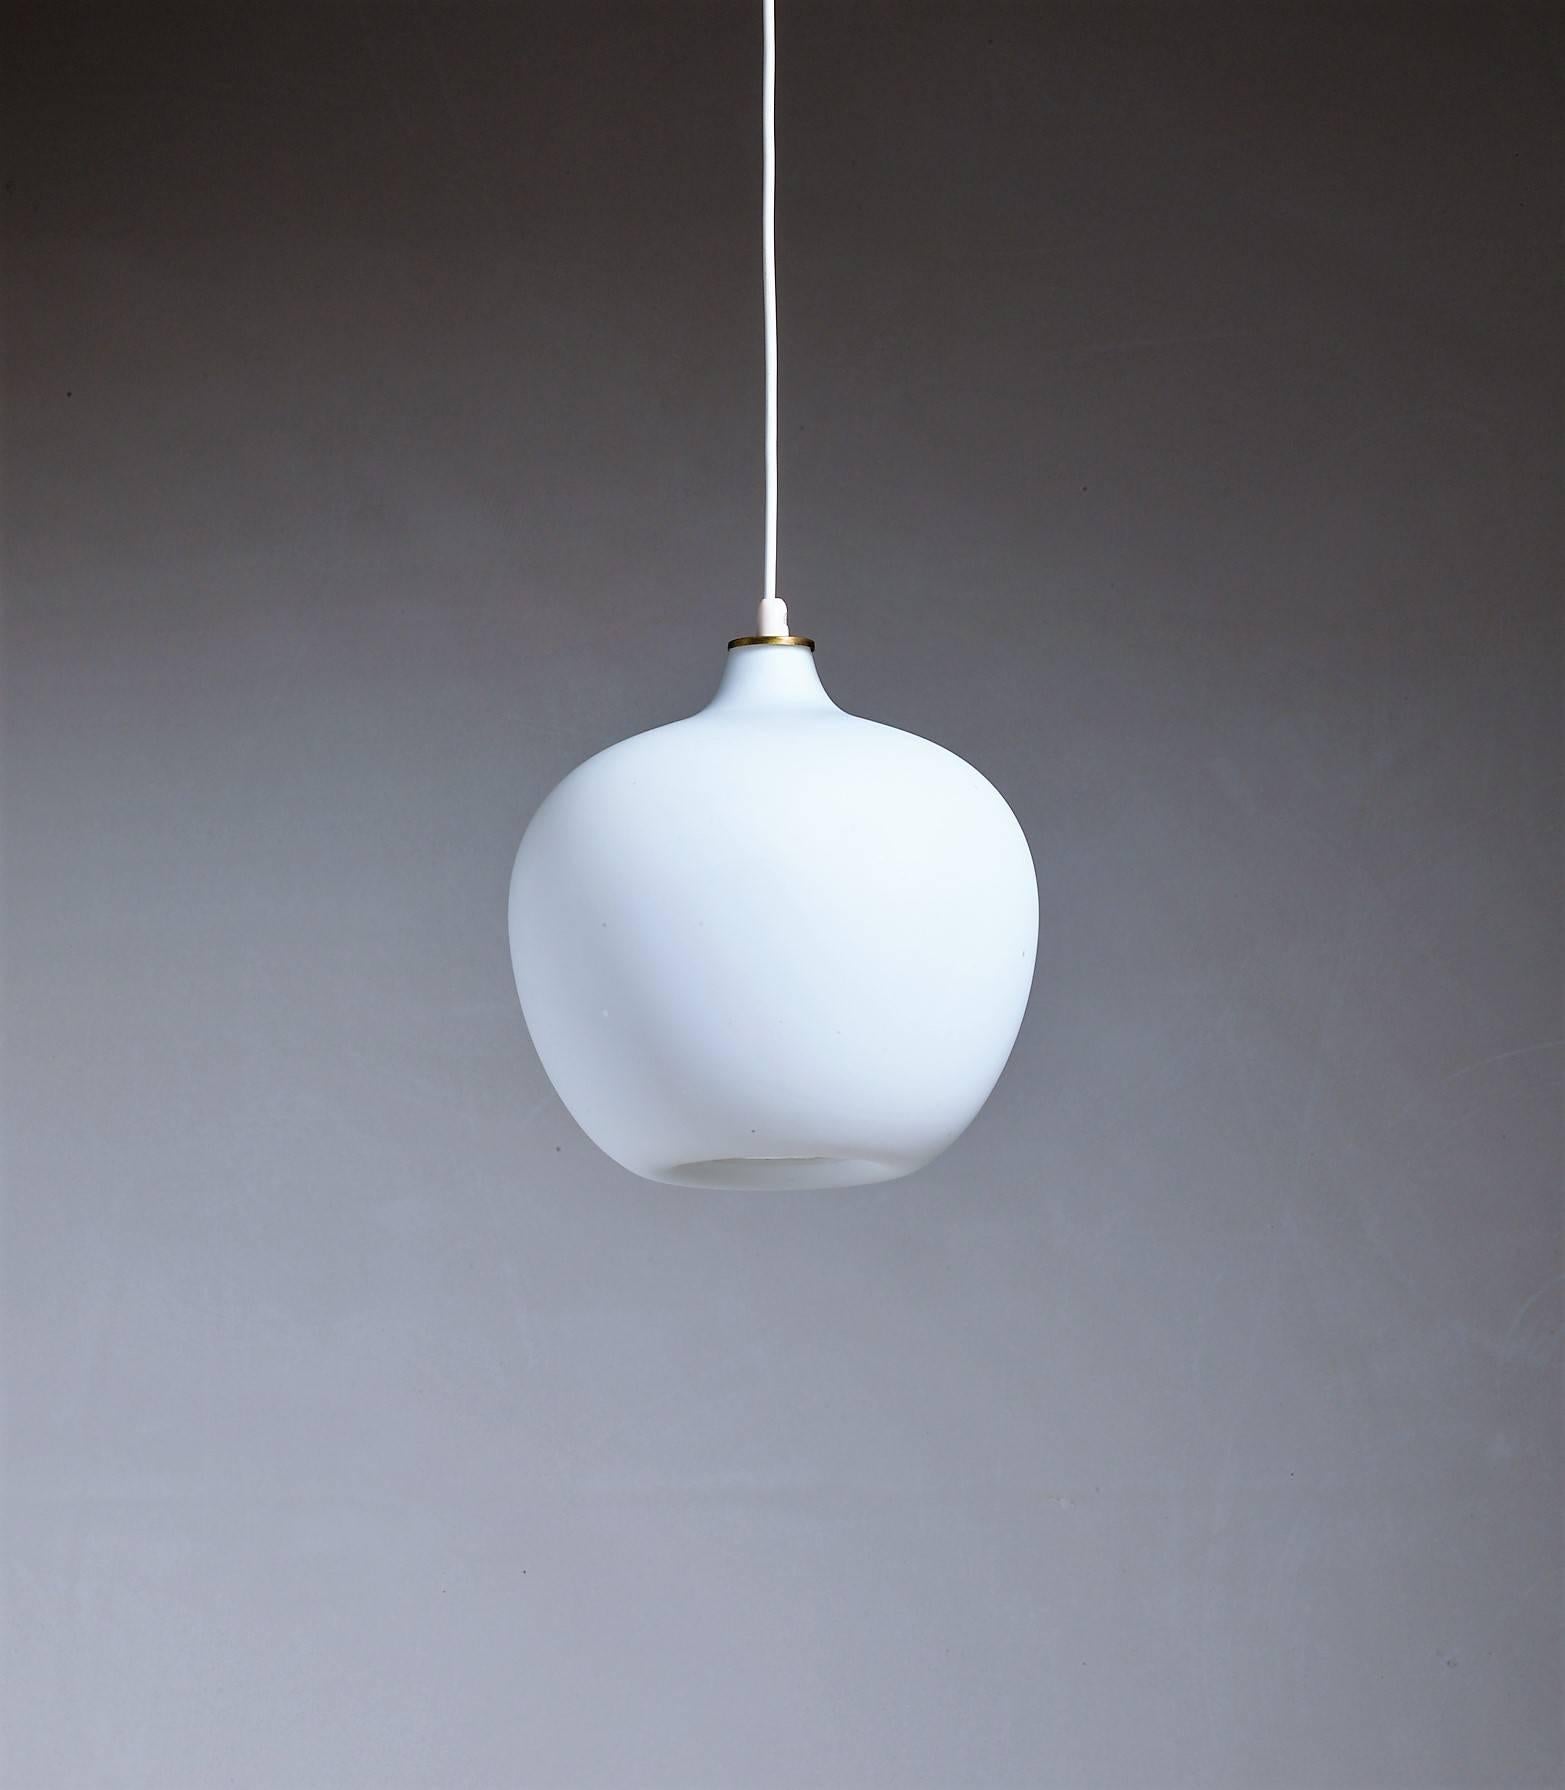 A Tapio Wirkkala model 51129 pendant for Idman, made of an opaline glass inward curved diffuser, a brass ceiling mount and a beautiful brass ring at the top. Just the little detail that makes the difference.
Total drop can be adjusted to your